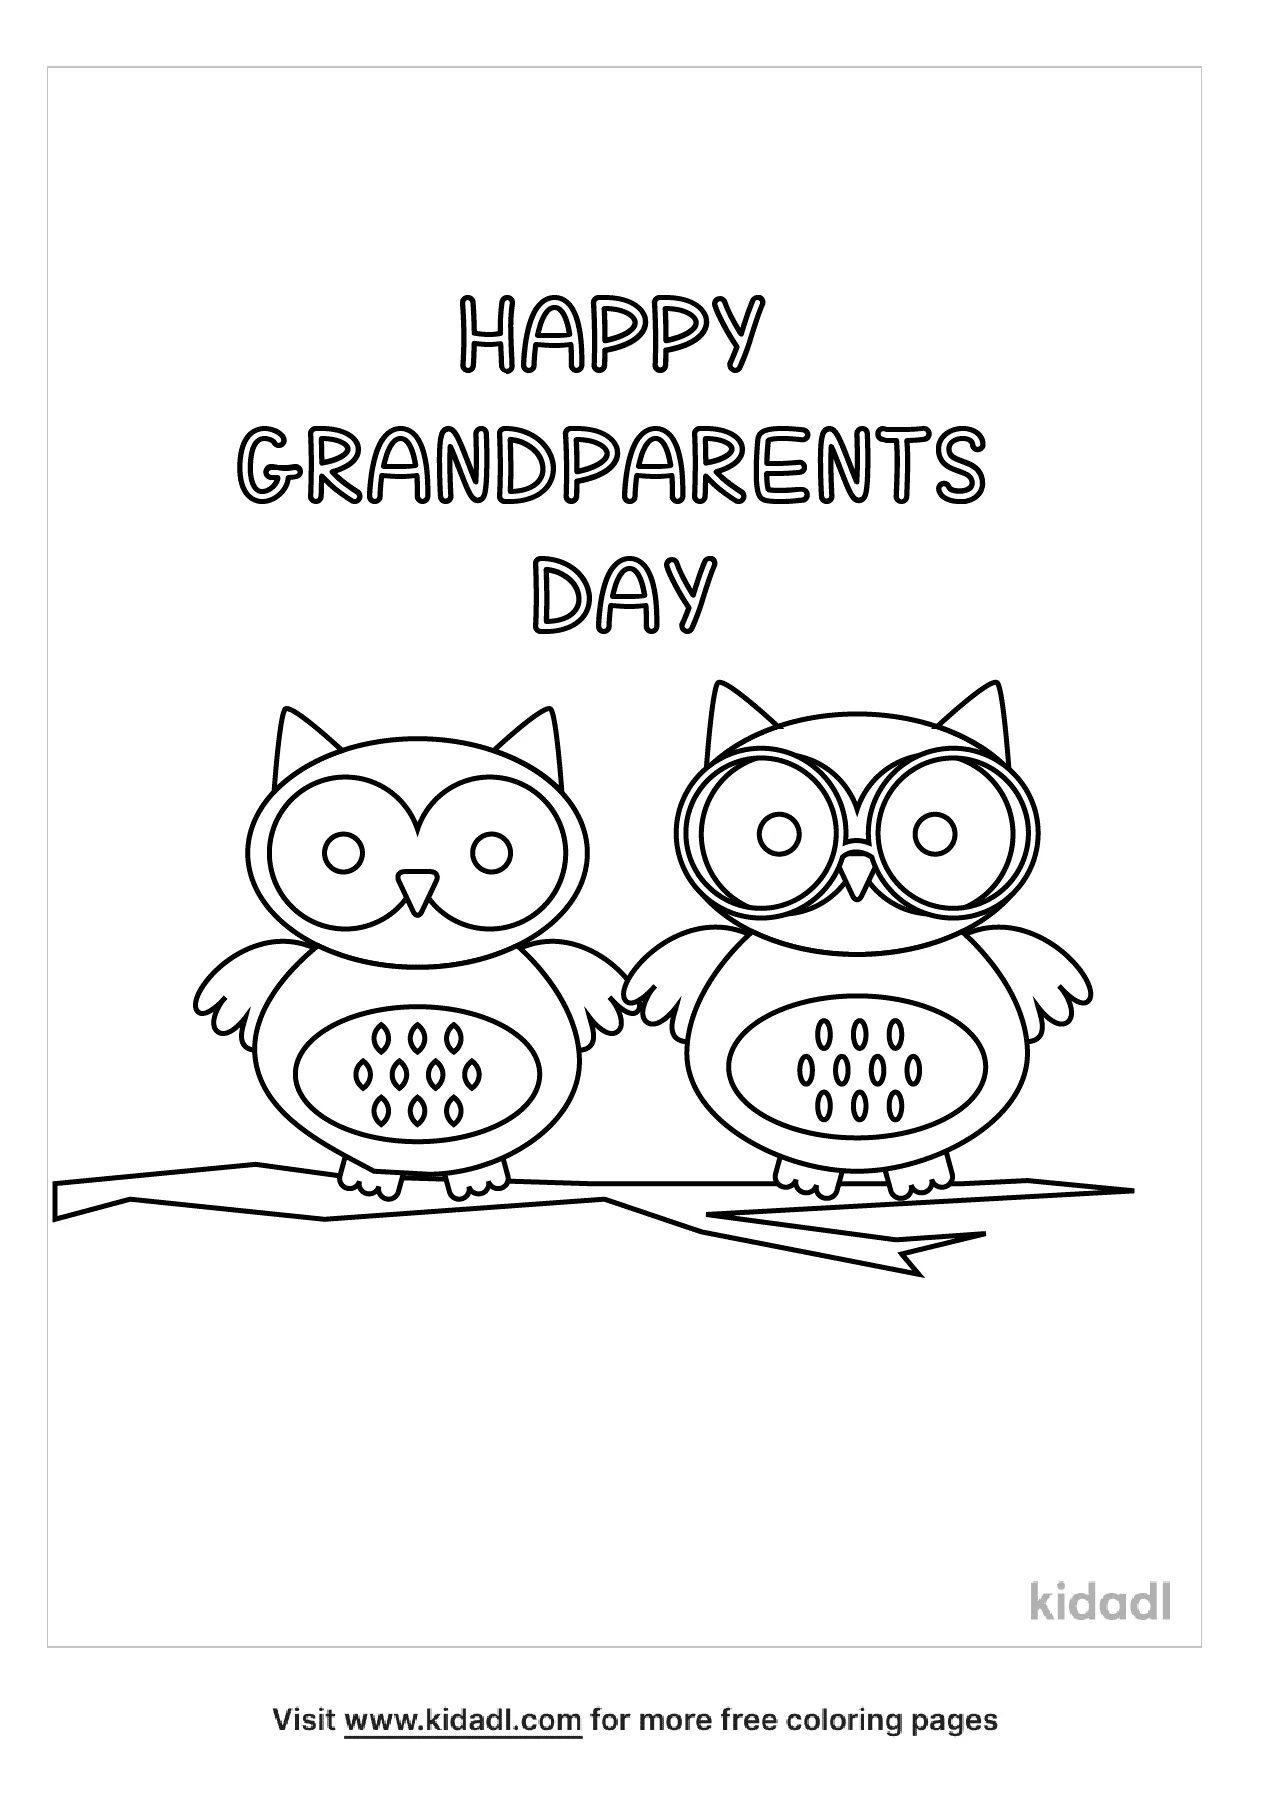 Grandparents Day Owl Coloring Page